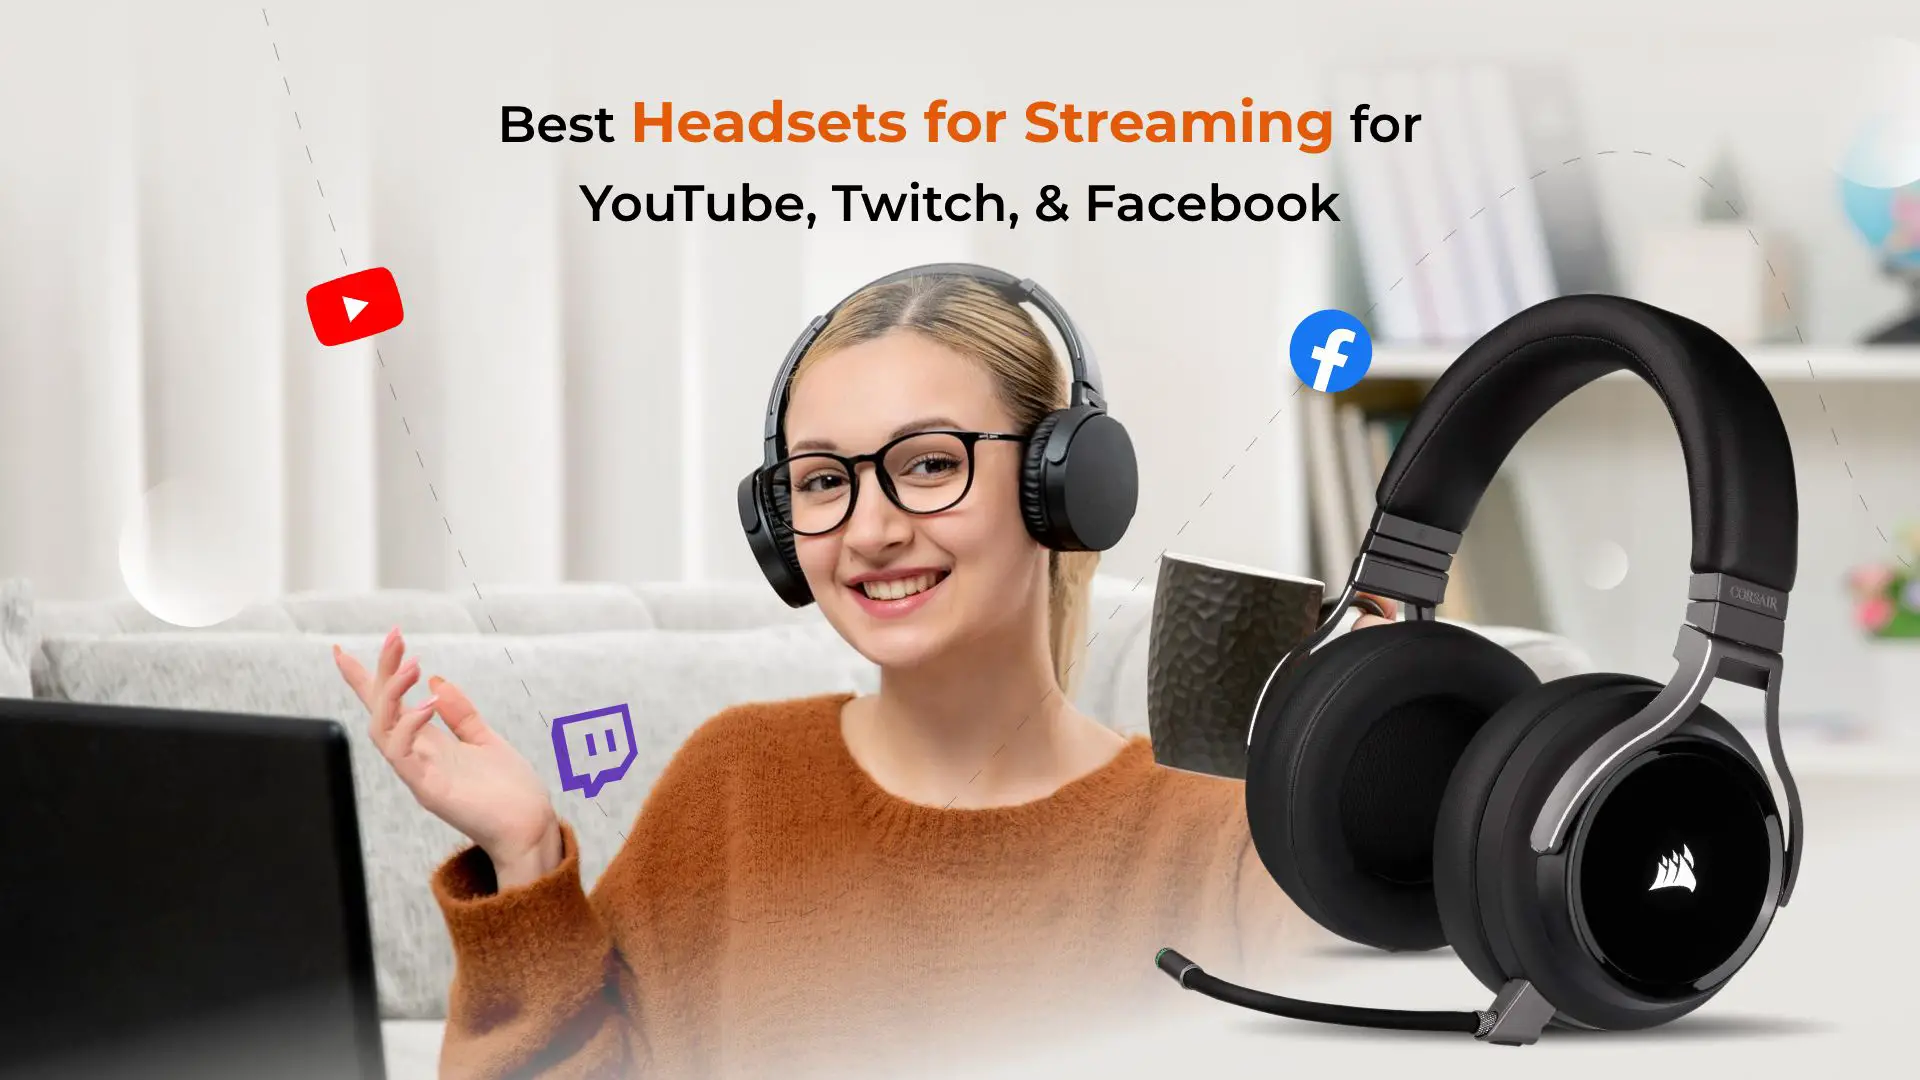 10 Best Headsets for Streaming for YouTube, Twitch, & Facebook